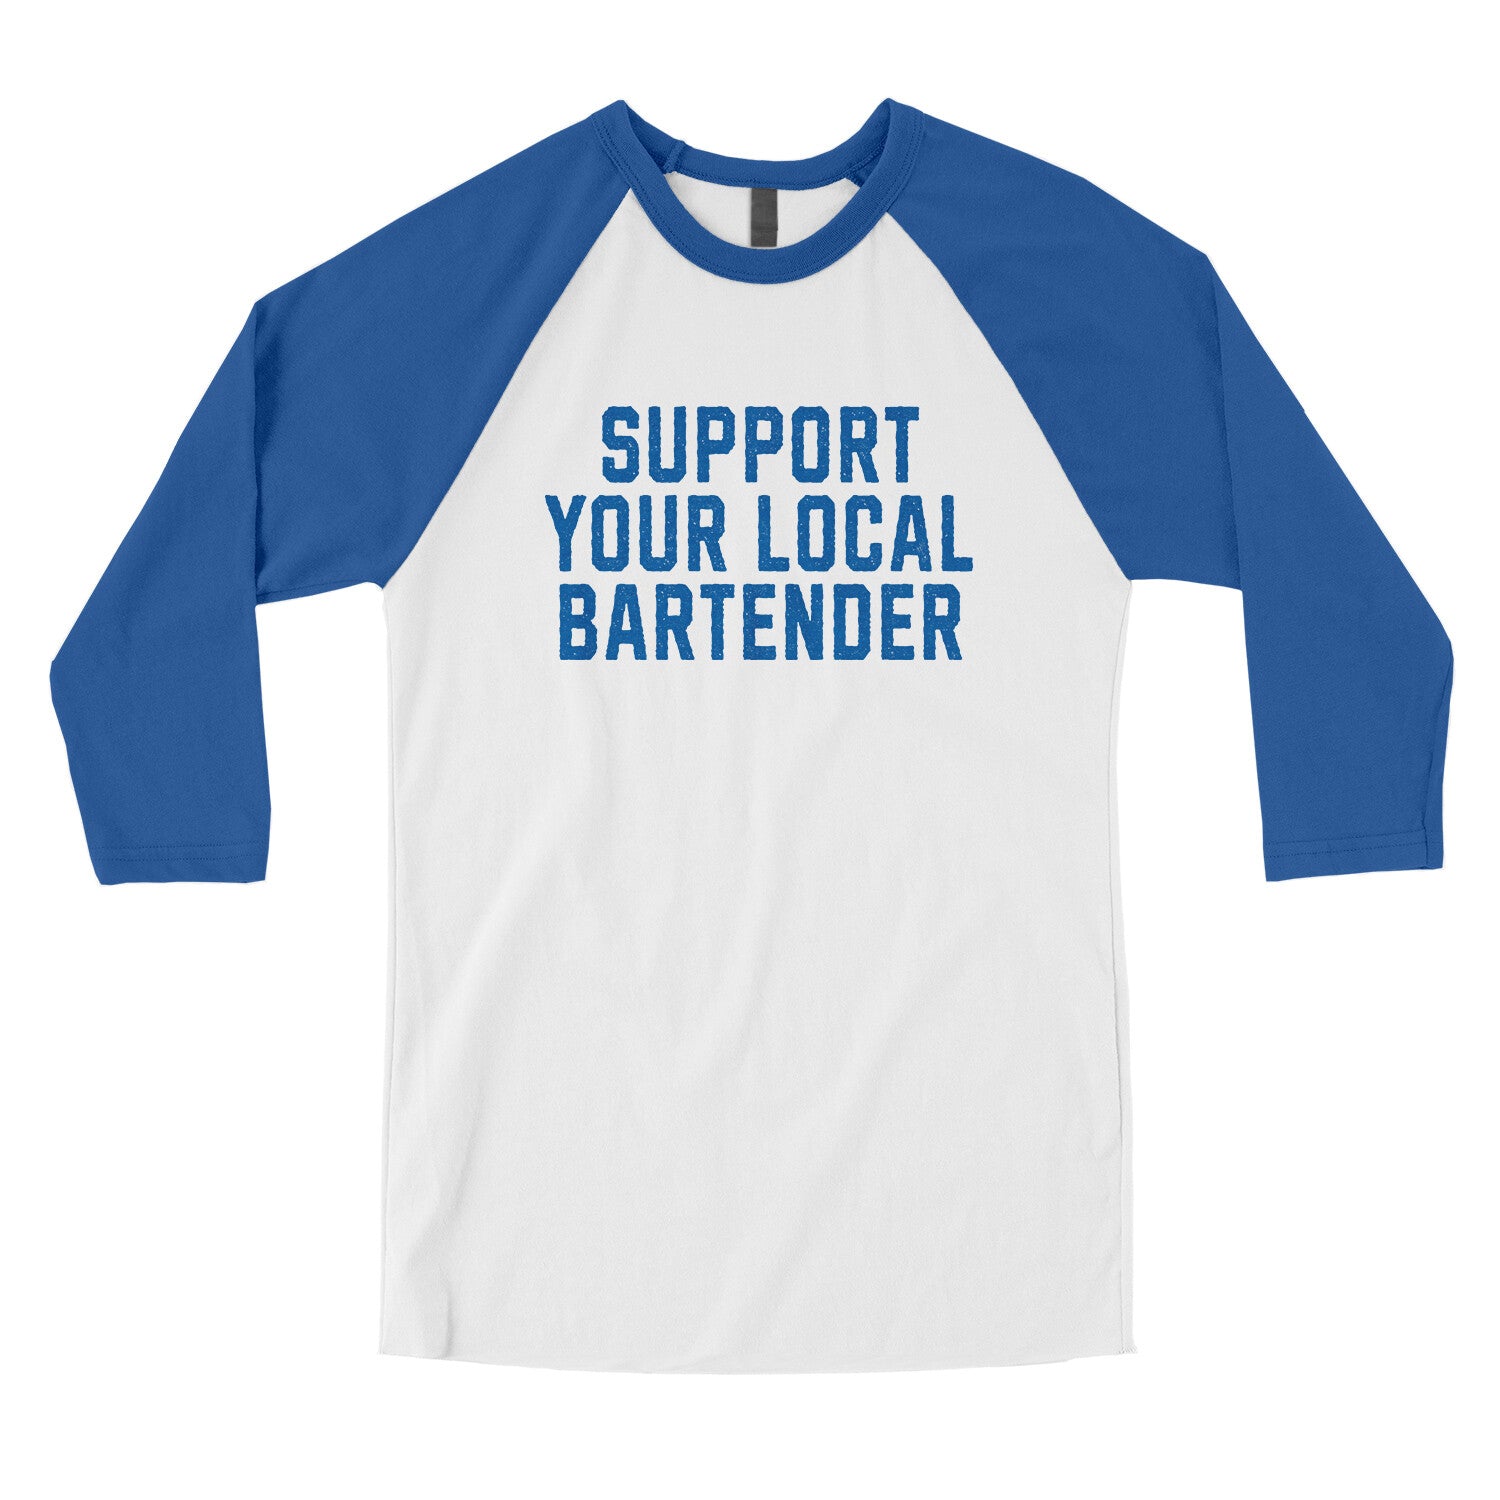 Support your Local Bartender in White with True Royal Color